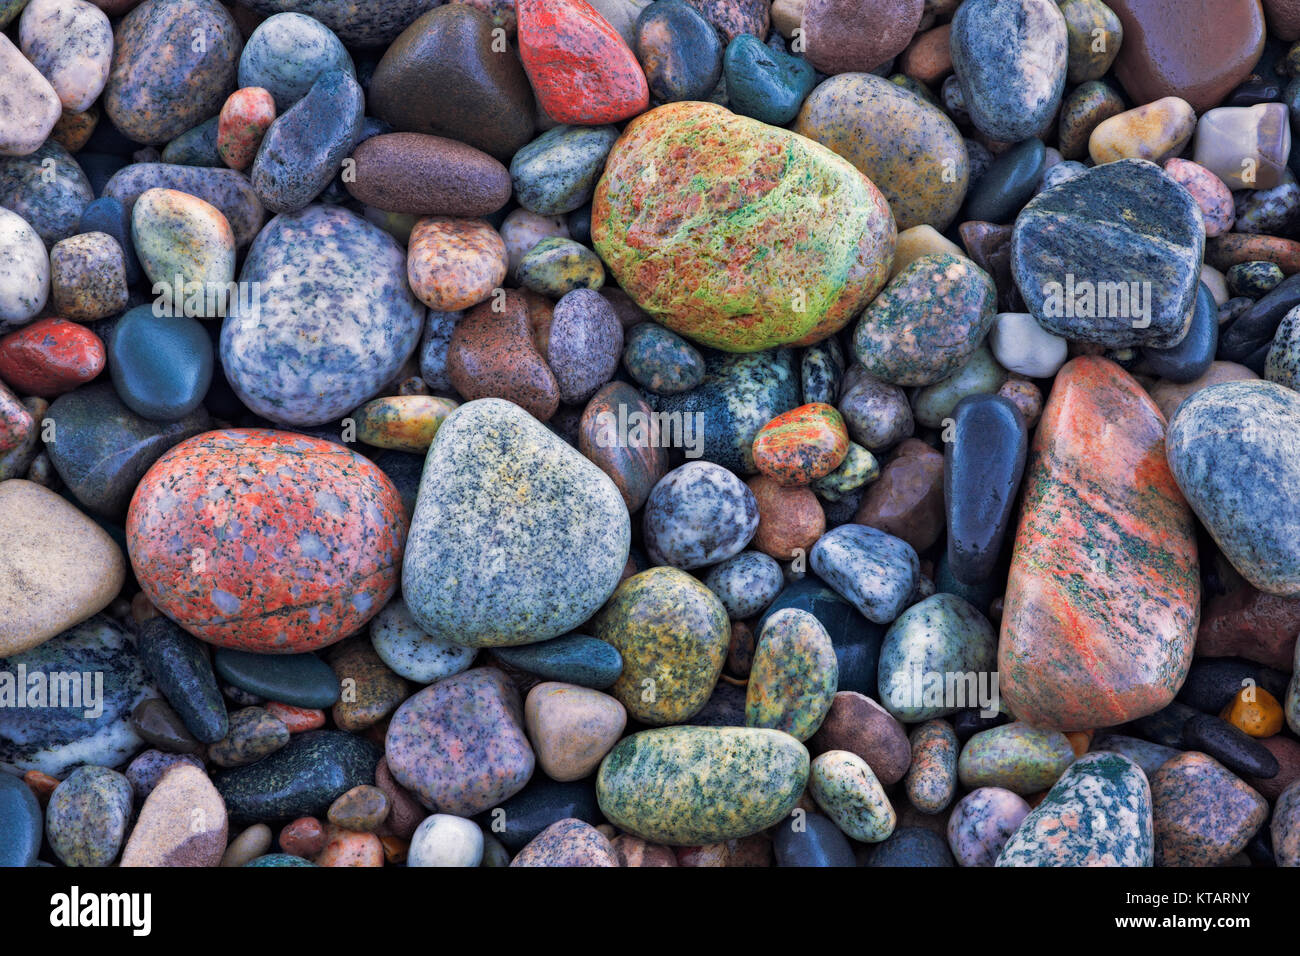 Colorful rocks found along the shoreline of Lake Superior at Au Sable Point in Pictured Rocks National Lakeshore and Michigan’s Upper Peninsula. Stock Photo